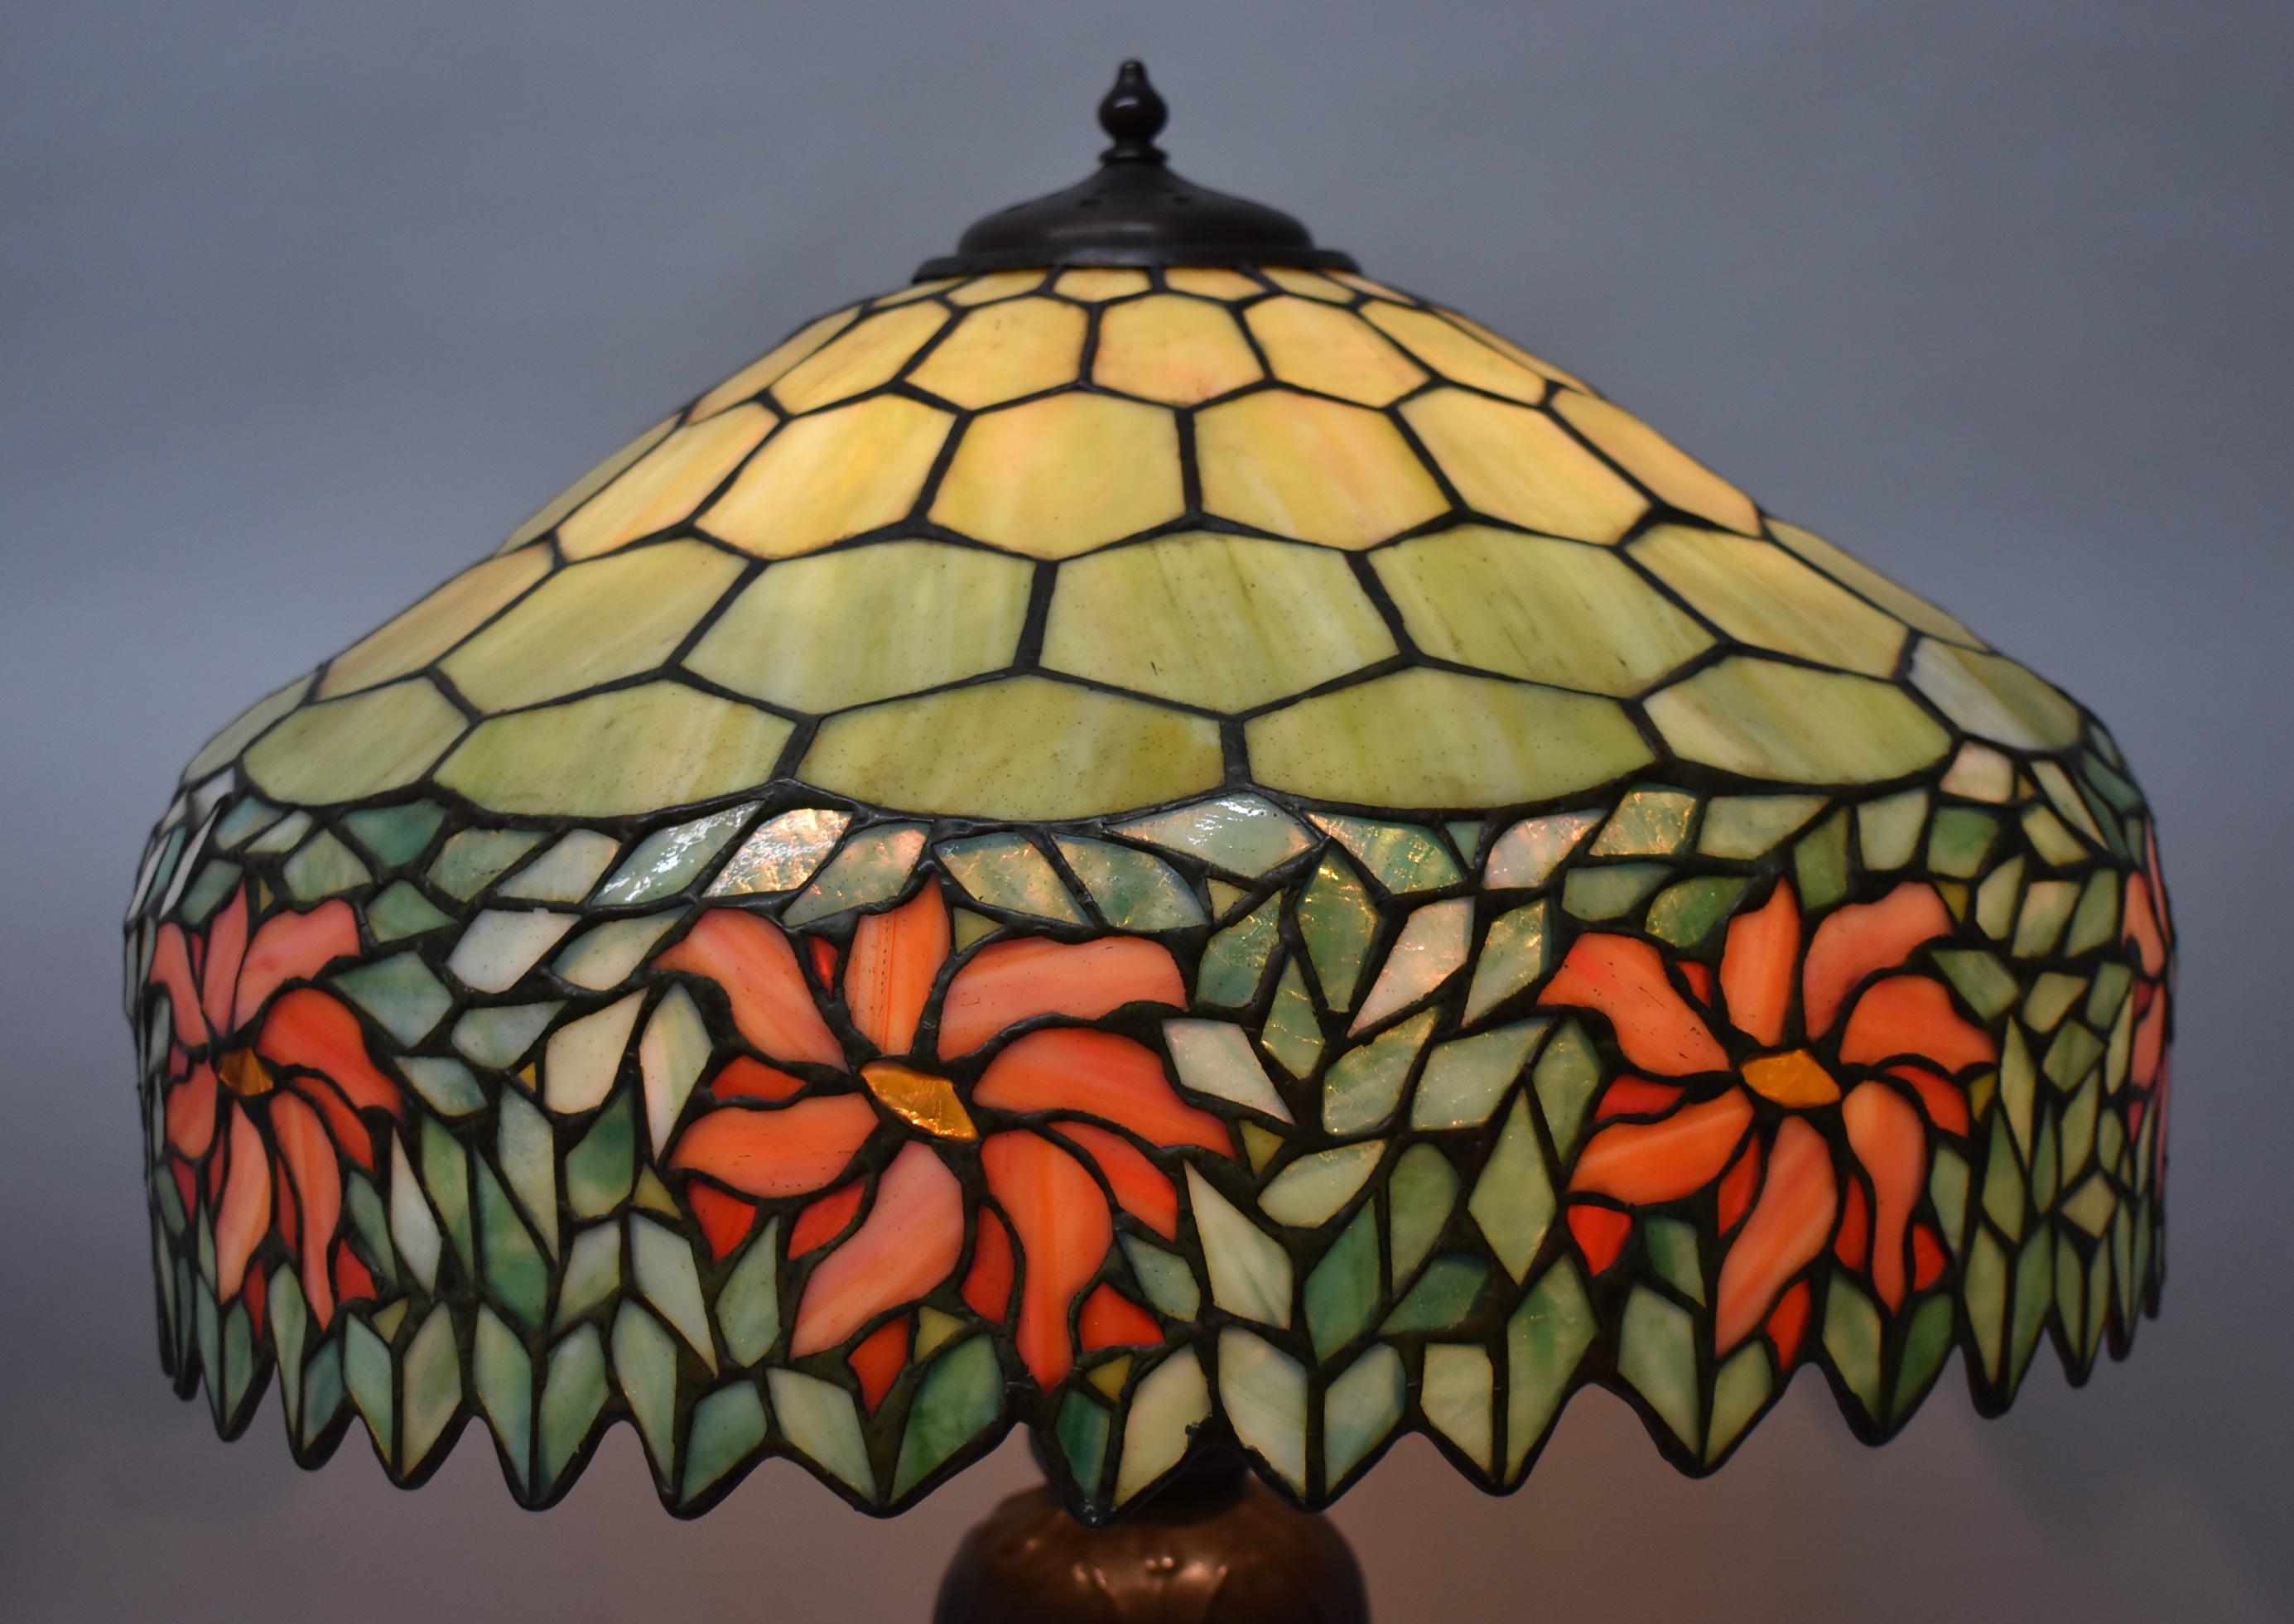 Antique Handel stained leaded glass table lamp with poinsettia details. Base has original patina with three Hubbell sockets and three acorn pulls. There is one small break in the small panes up around opening. Rewired with vintage style cloth cord.